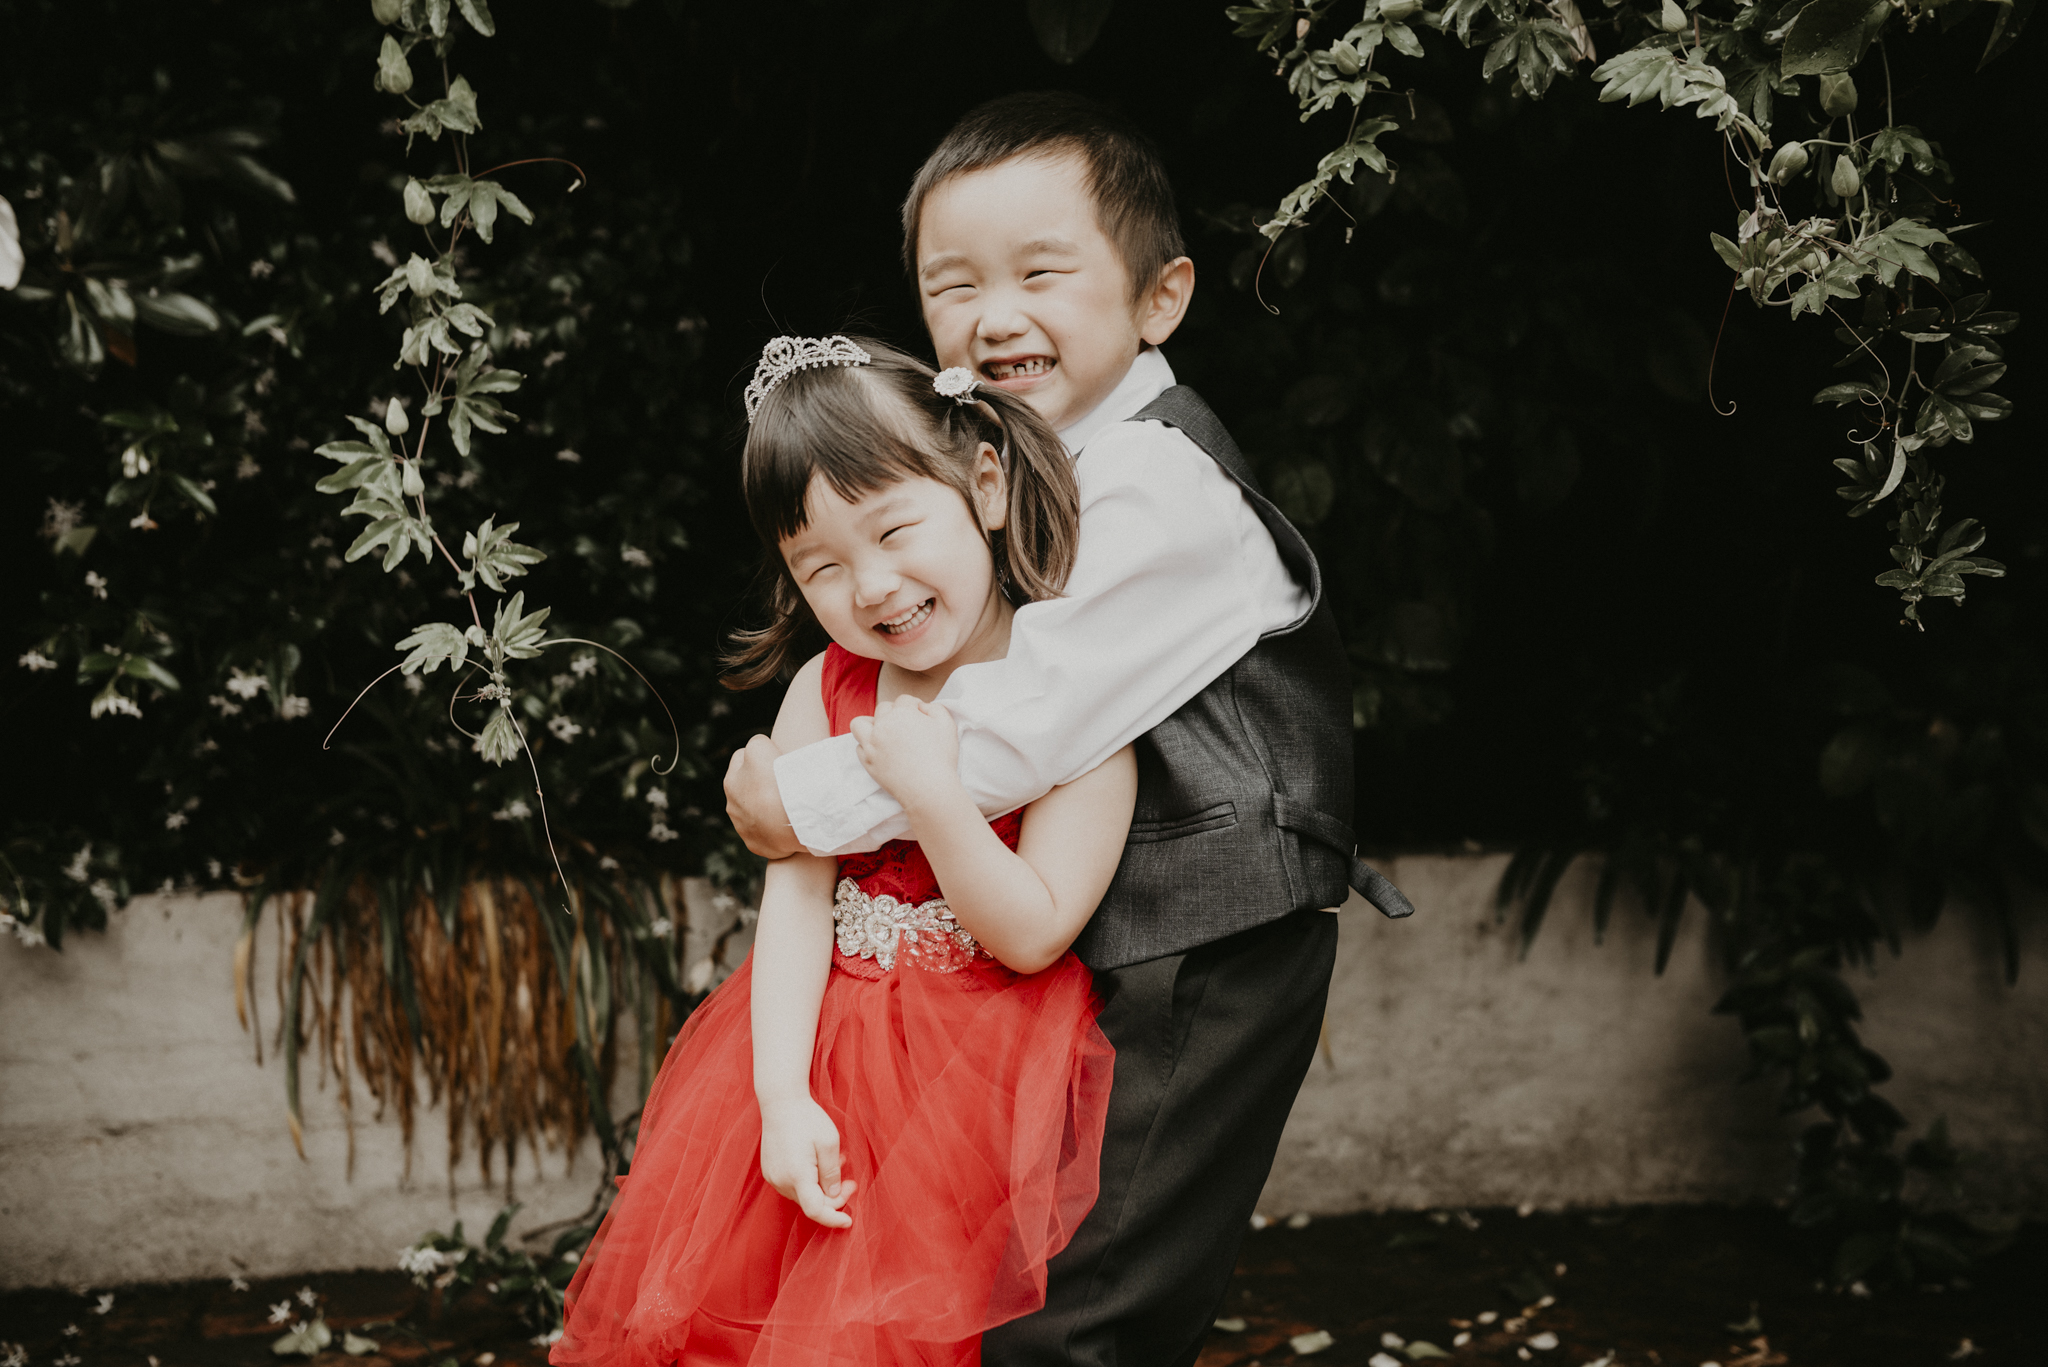 agnes-duy-15th-december-2018-chinese-vietnamese-wedding-tea-ceremony-yarraville-home-house-documentary-candid-photographer-sarah-matler-photography-2